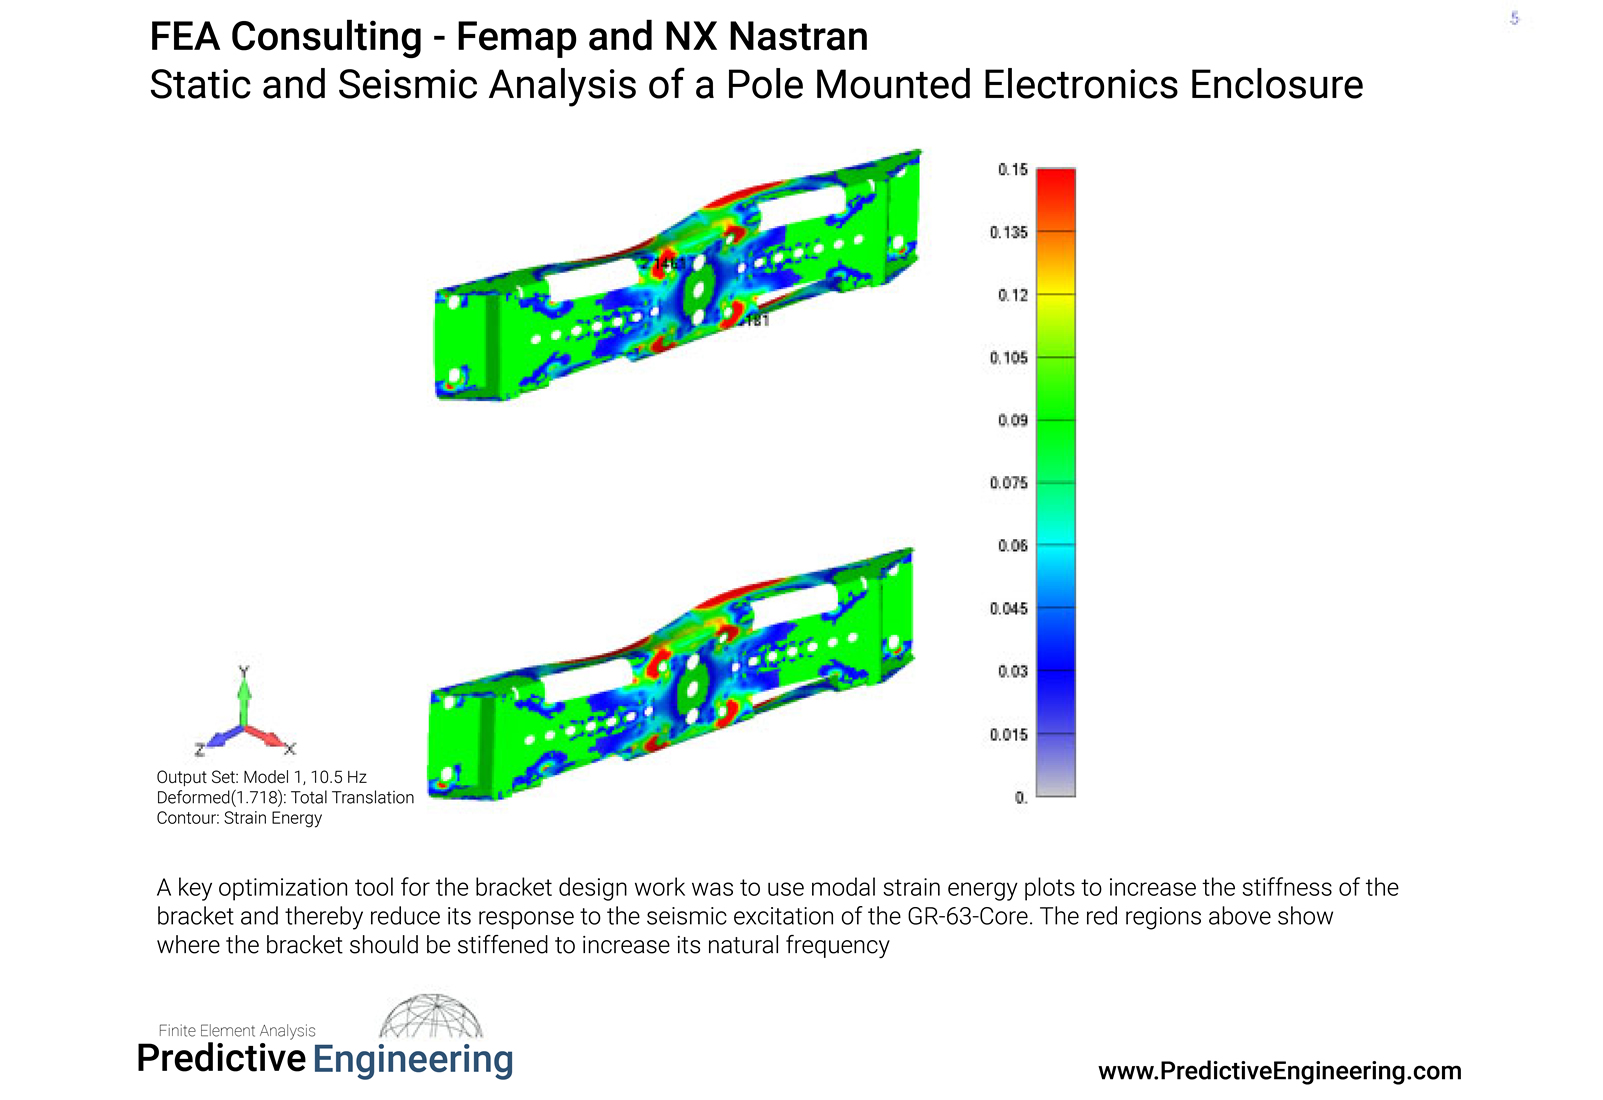 Figure 4: Strain energy density results from the normal modes analysis of the pole-mounted electronics ensclousre